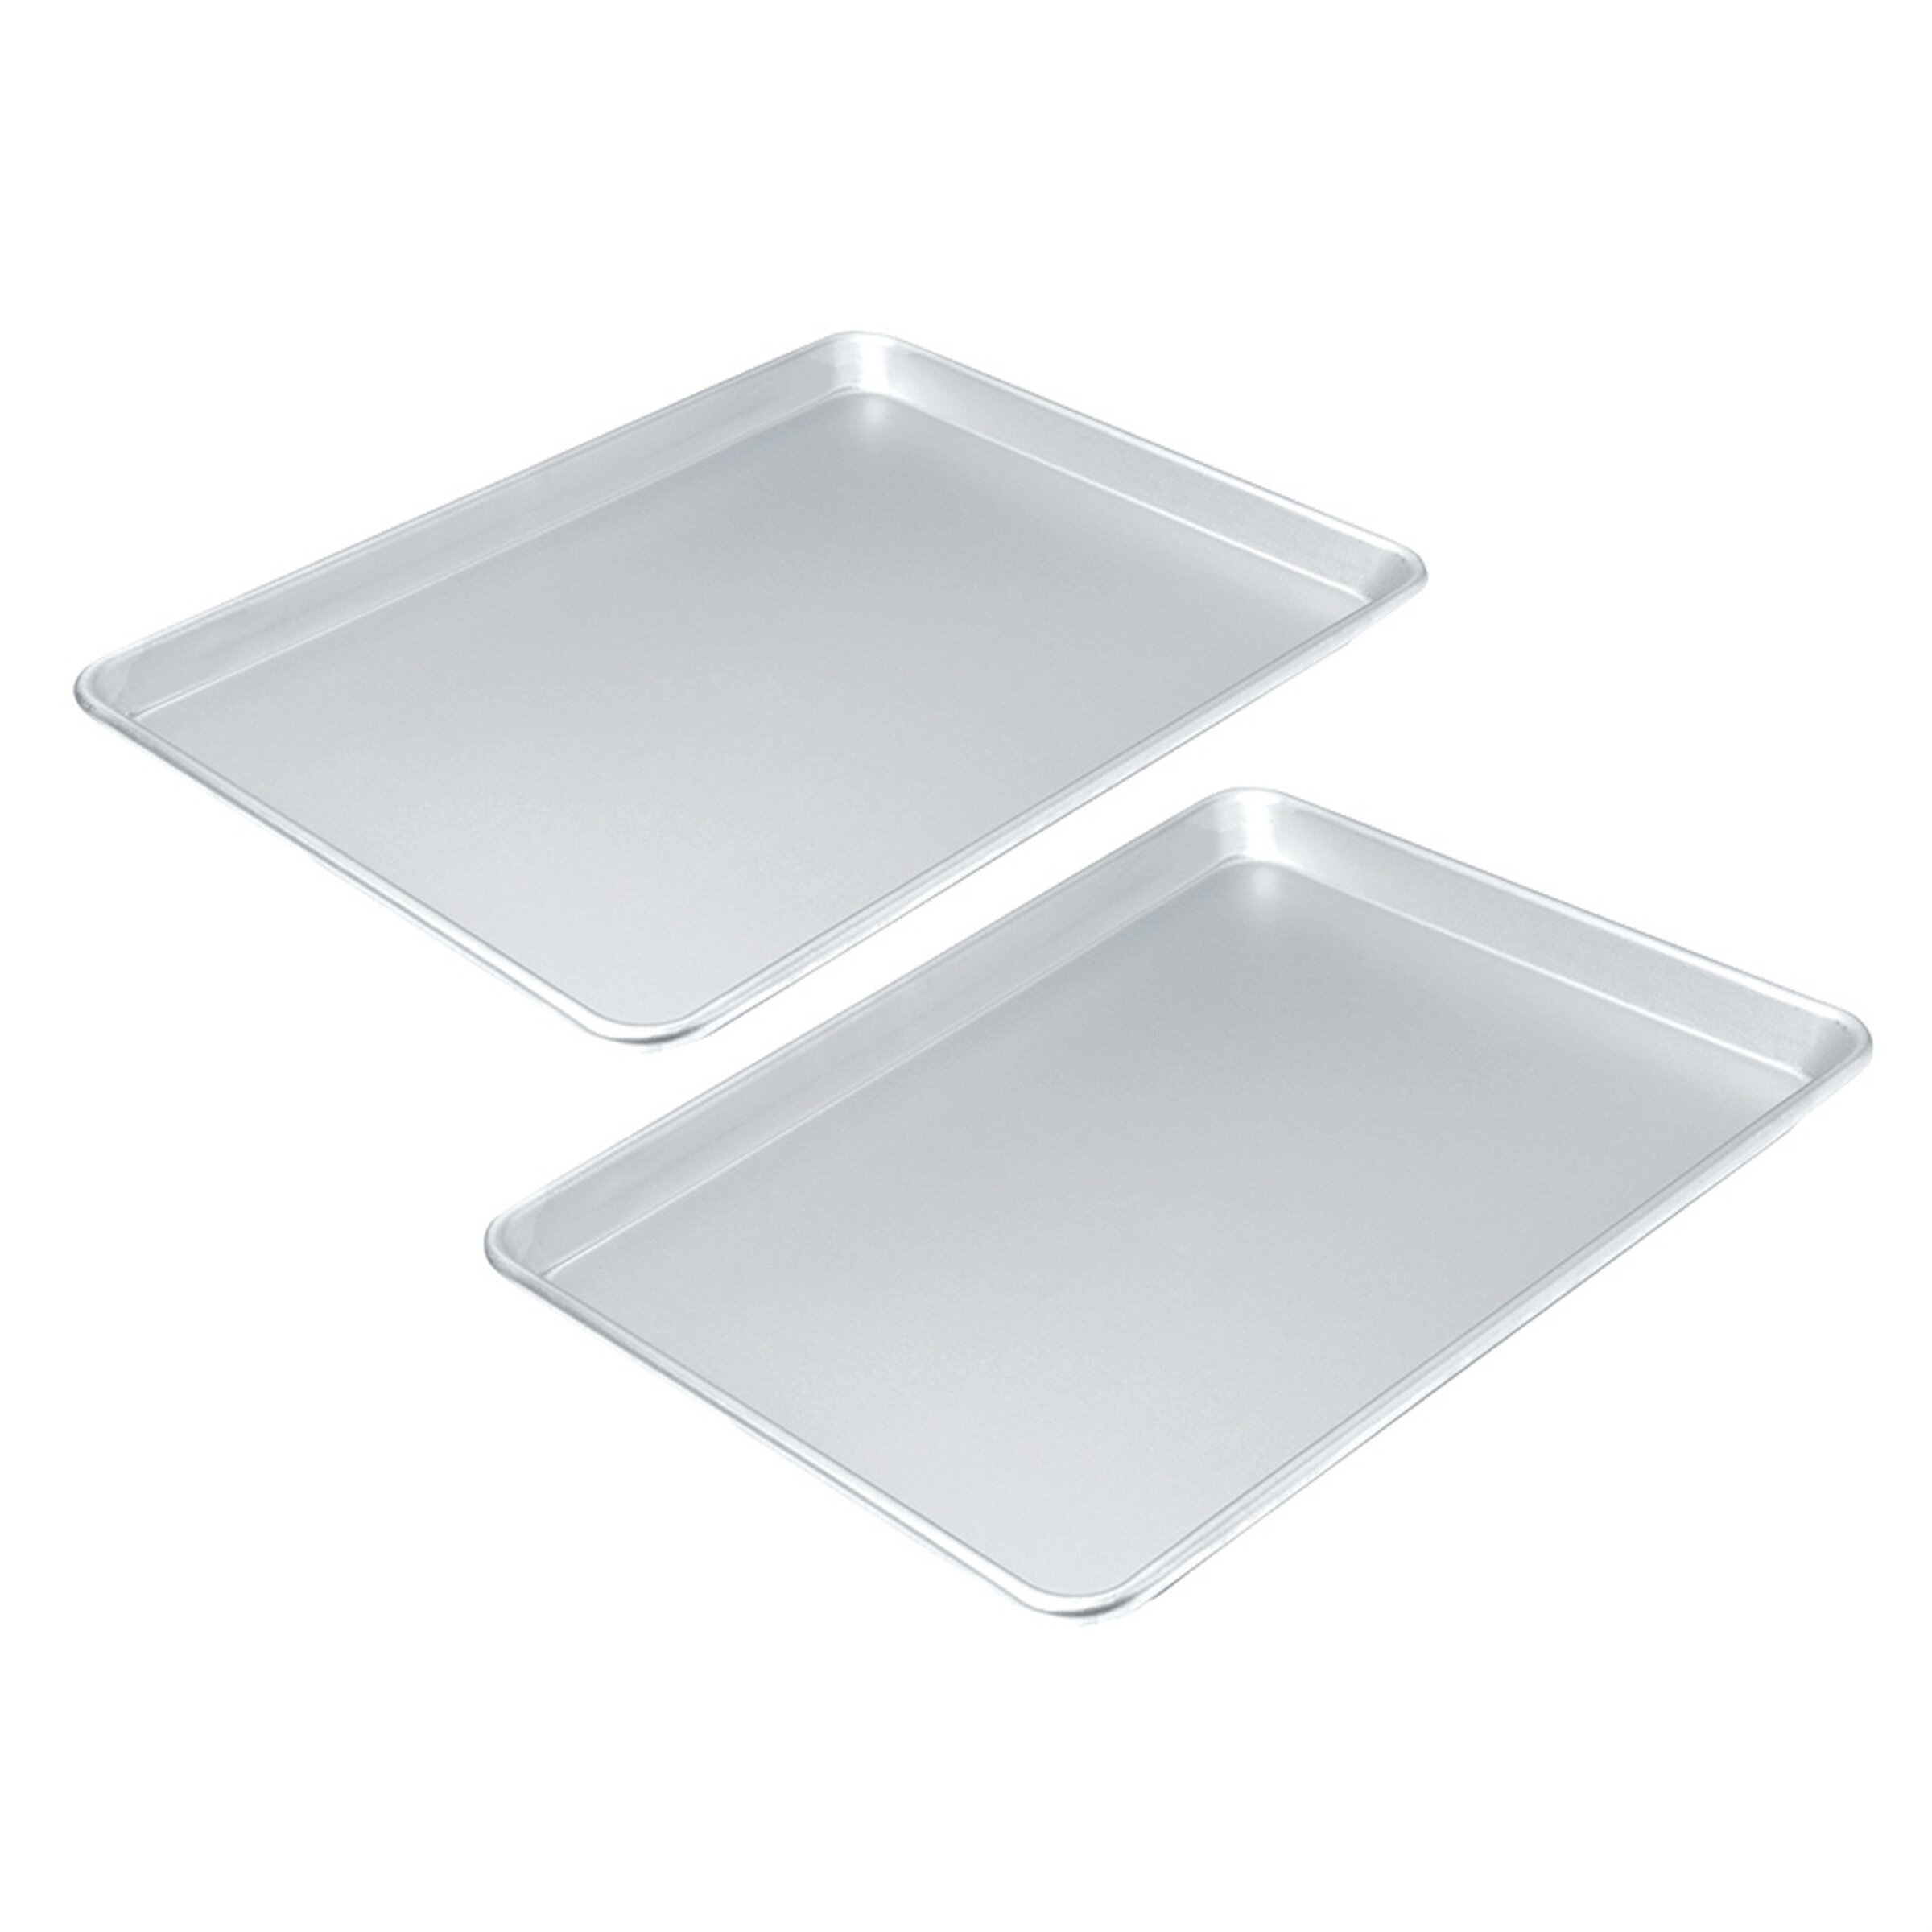 Commercial II Non-Stick Baking Sheet Small Jelly Roll Pan 13 By 9.5-Inch 